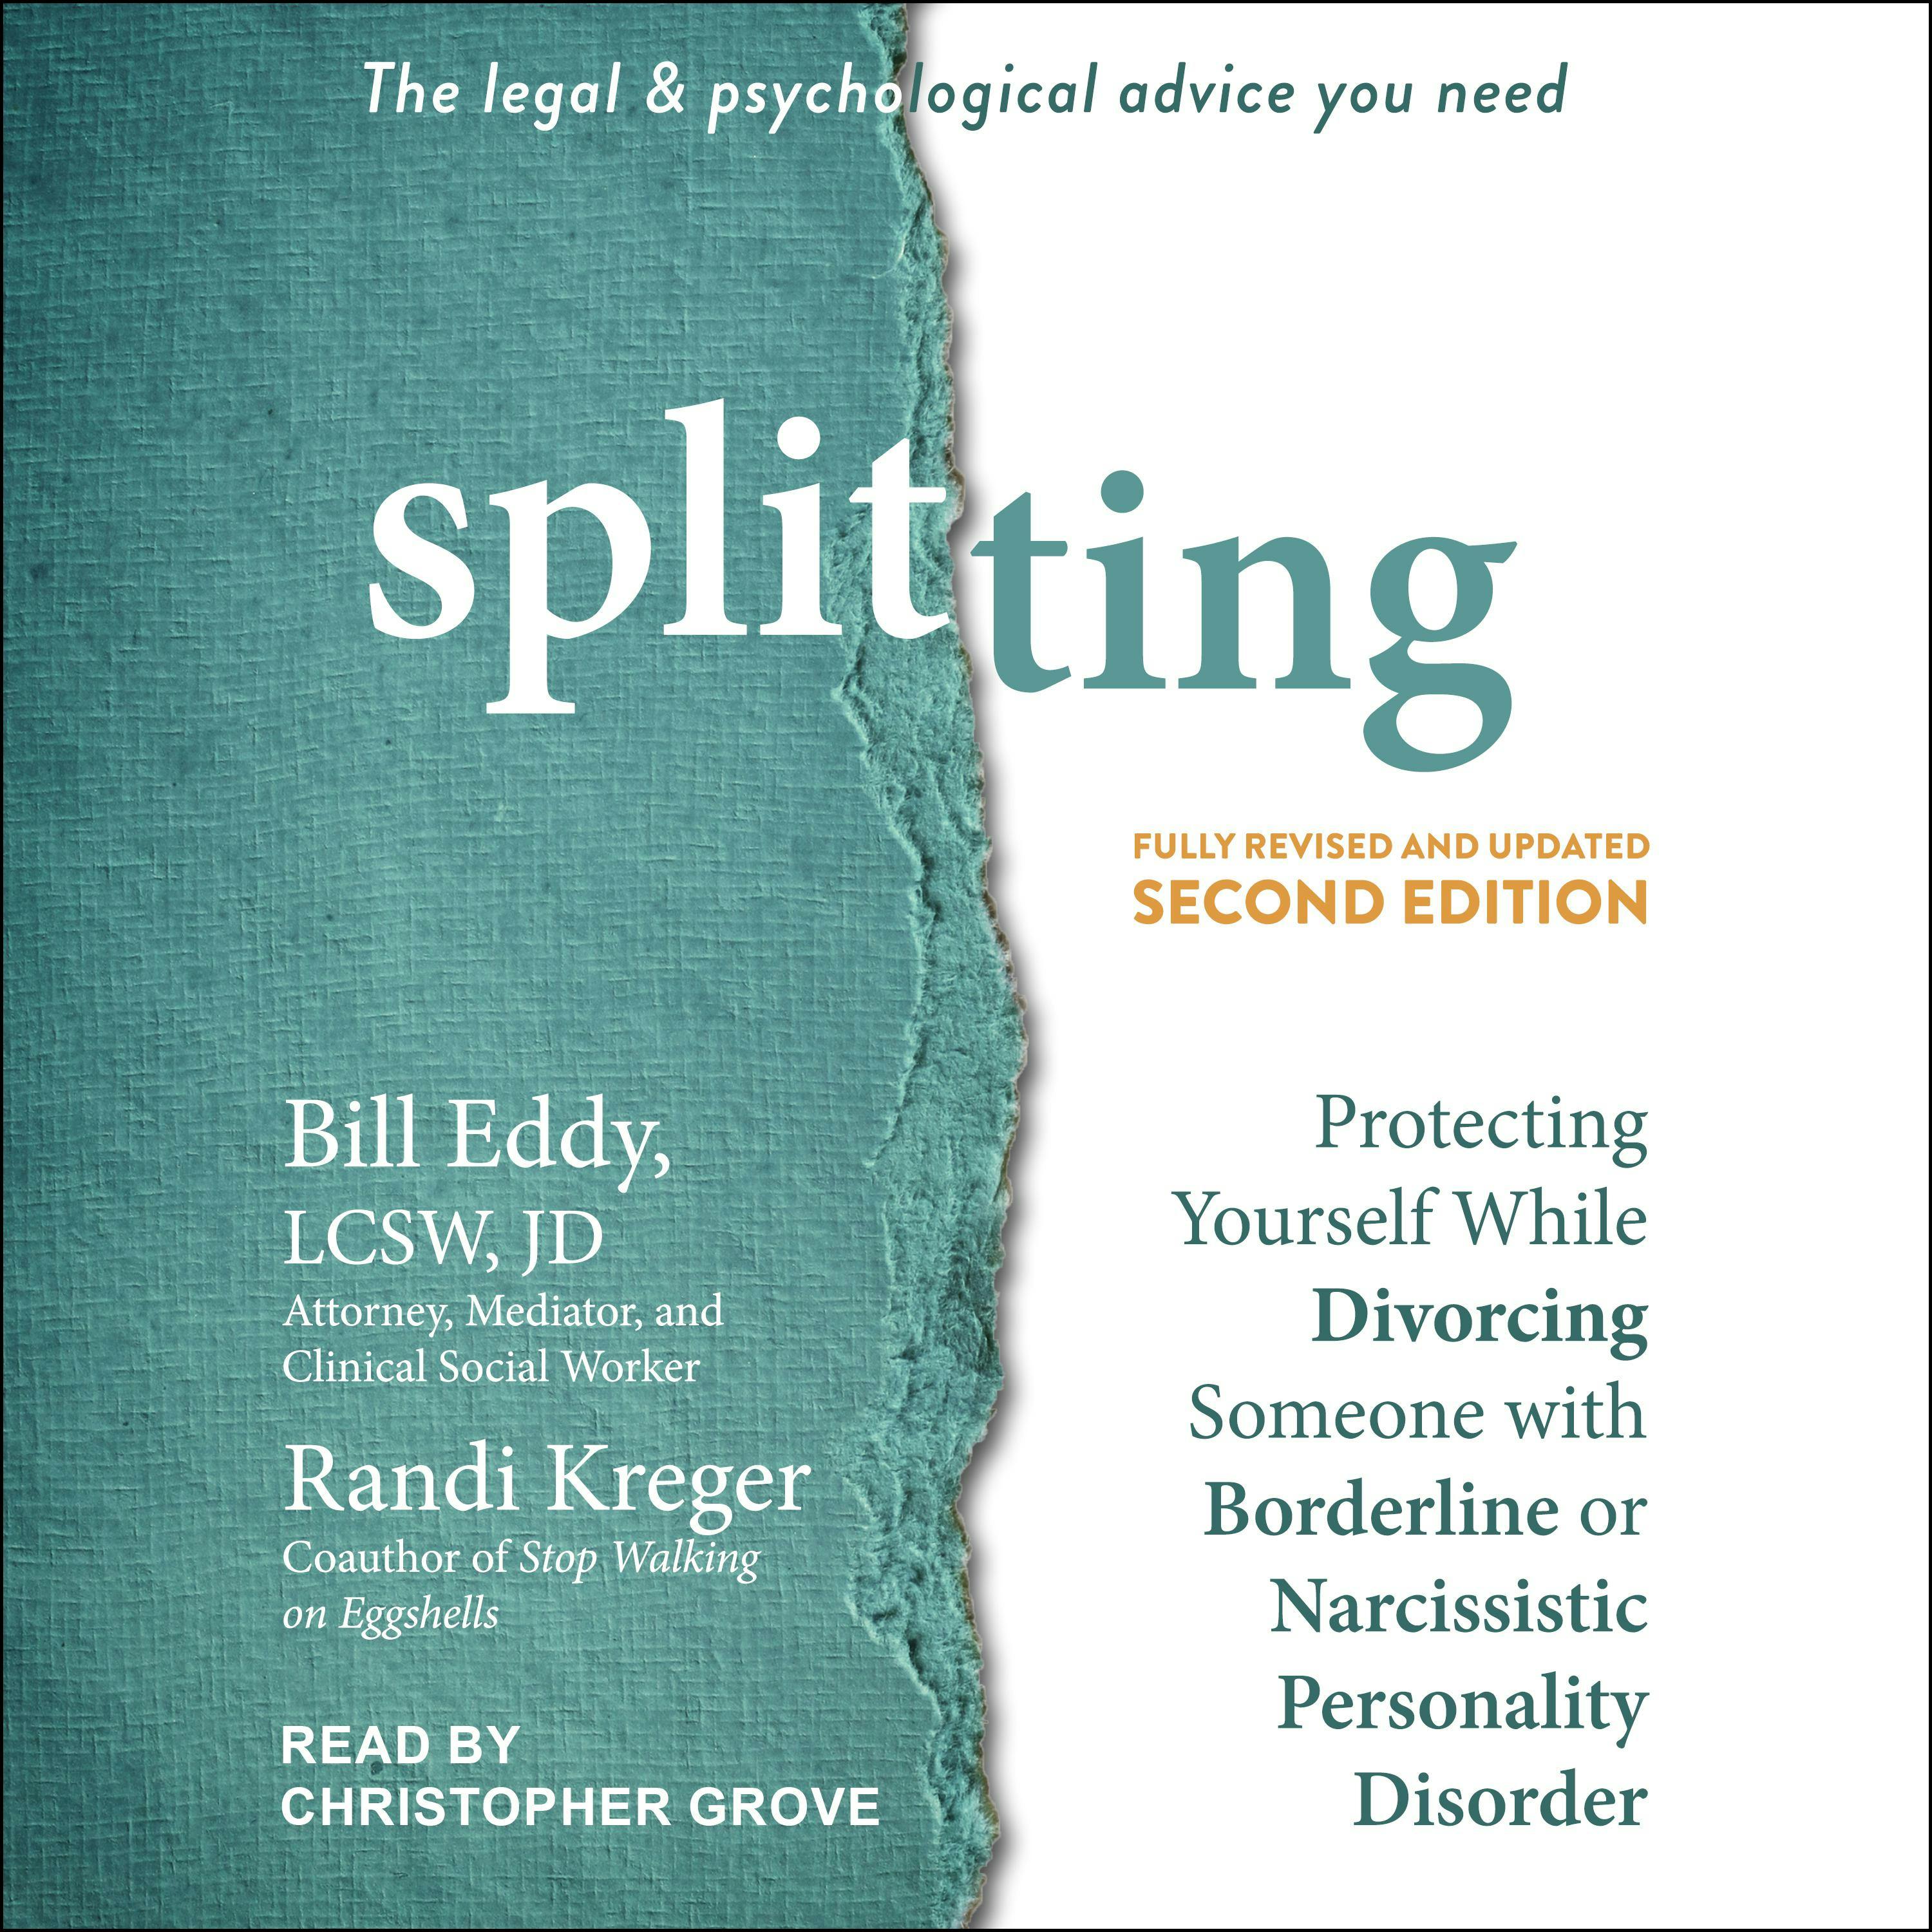 Splitting, Second Edition: Protecting Yourself While Divorcing Someone with Borderline or Narcissistic Personality Disorder - JD, Randi Kreger